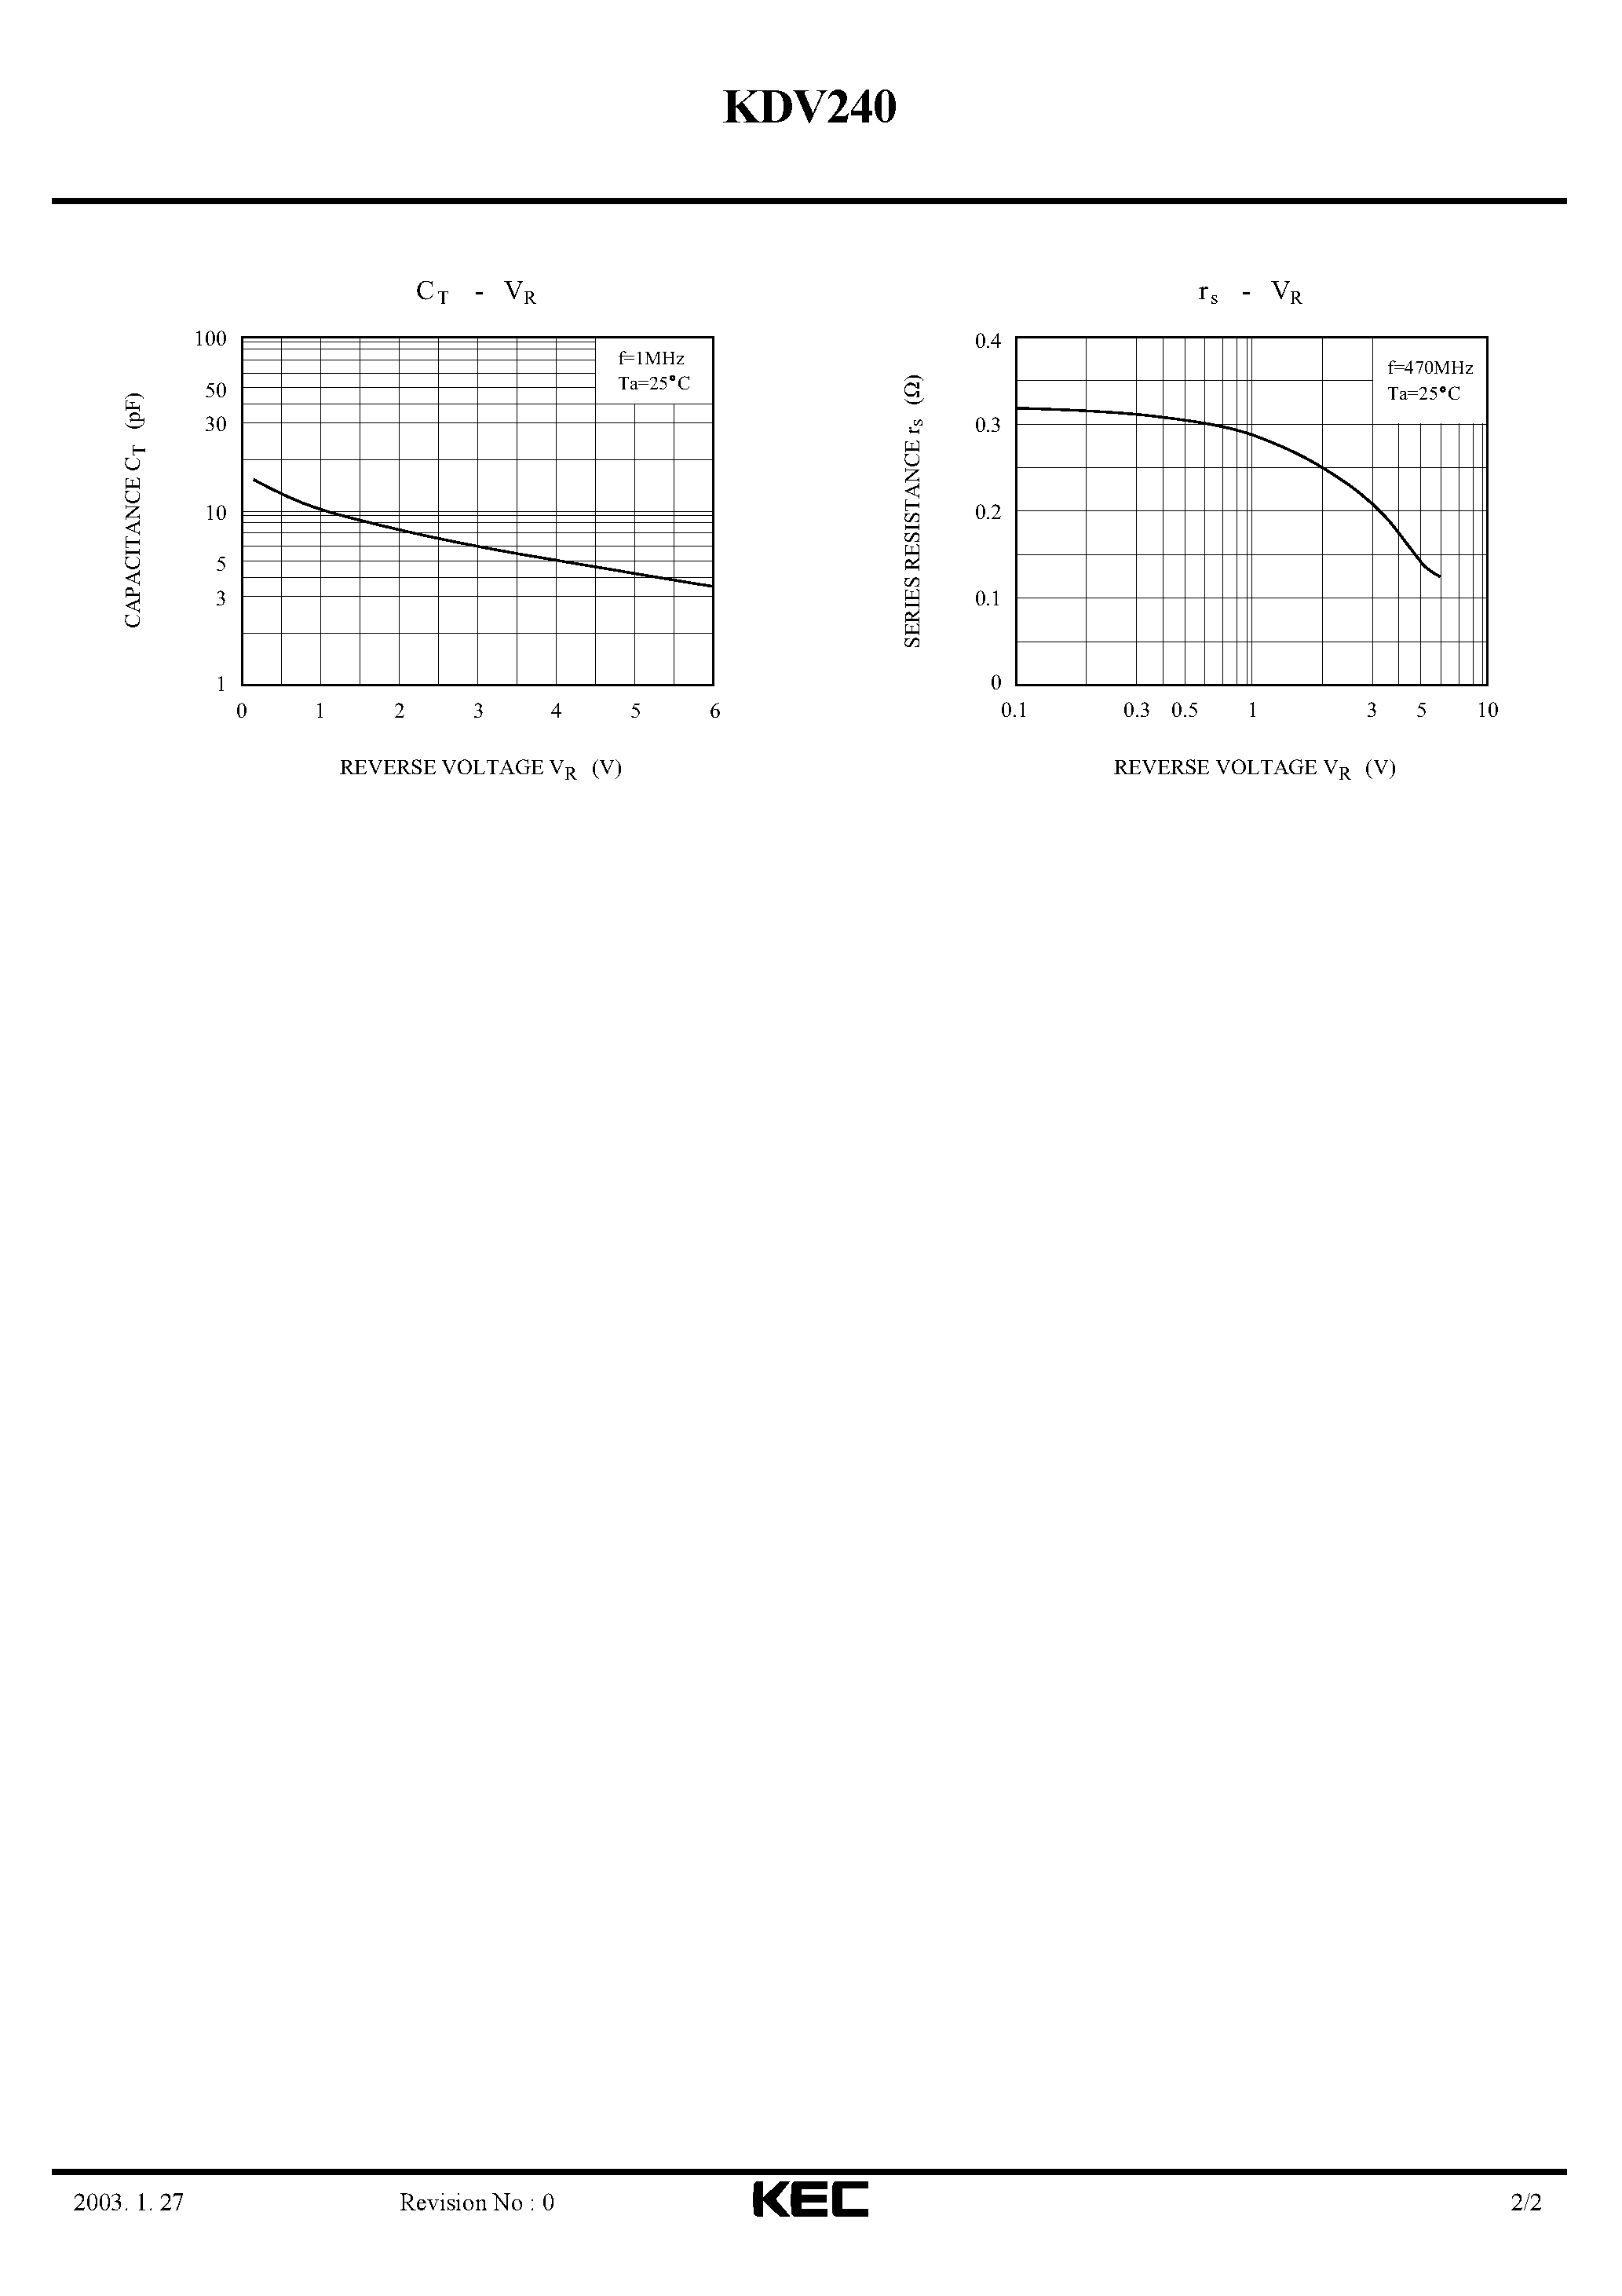 Datasheet KDV240 - VARIABLE CAPACITANCE DIODE SILICON EPITAXIAL PLANAR DIODE(VCO FOR UHF RADIO) page 2